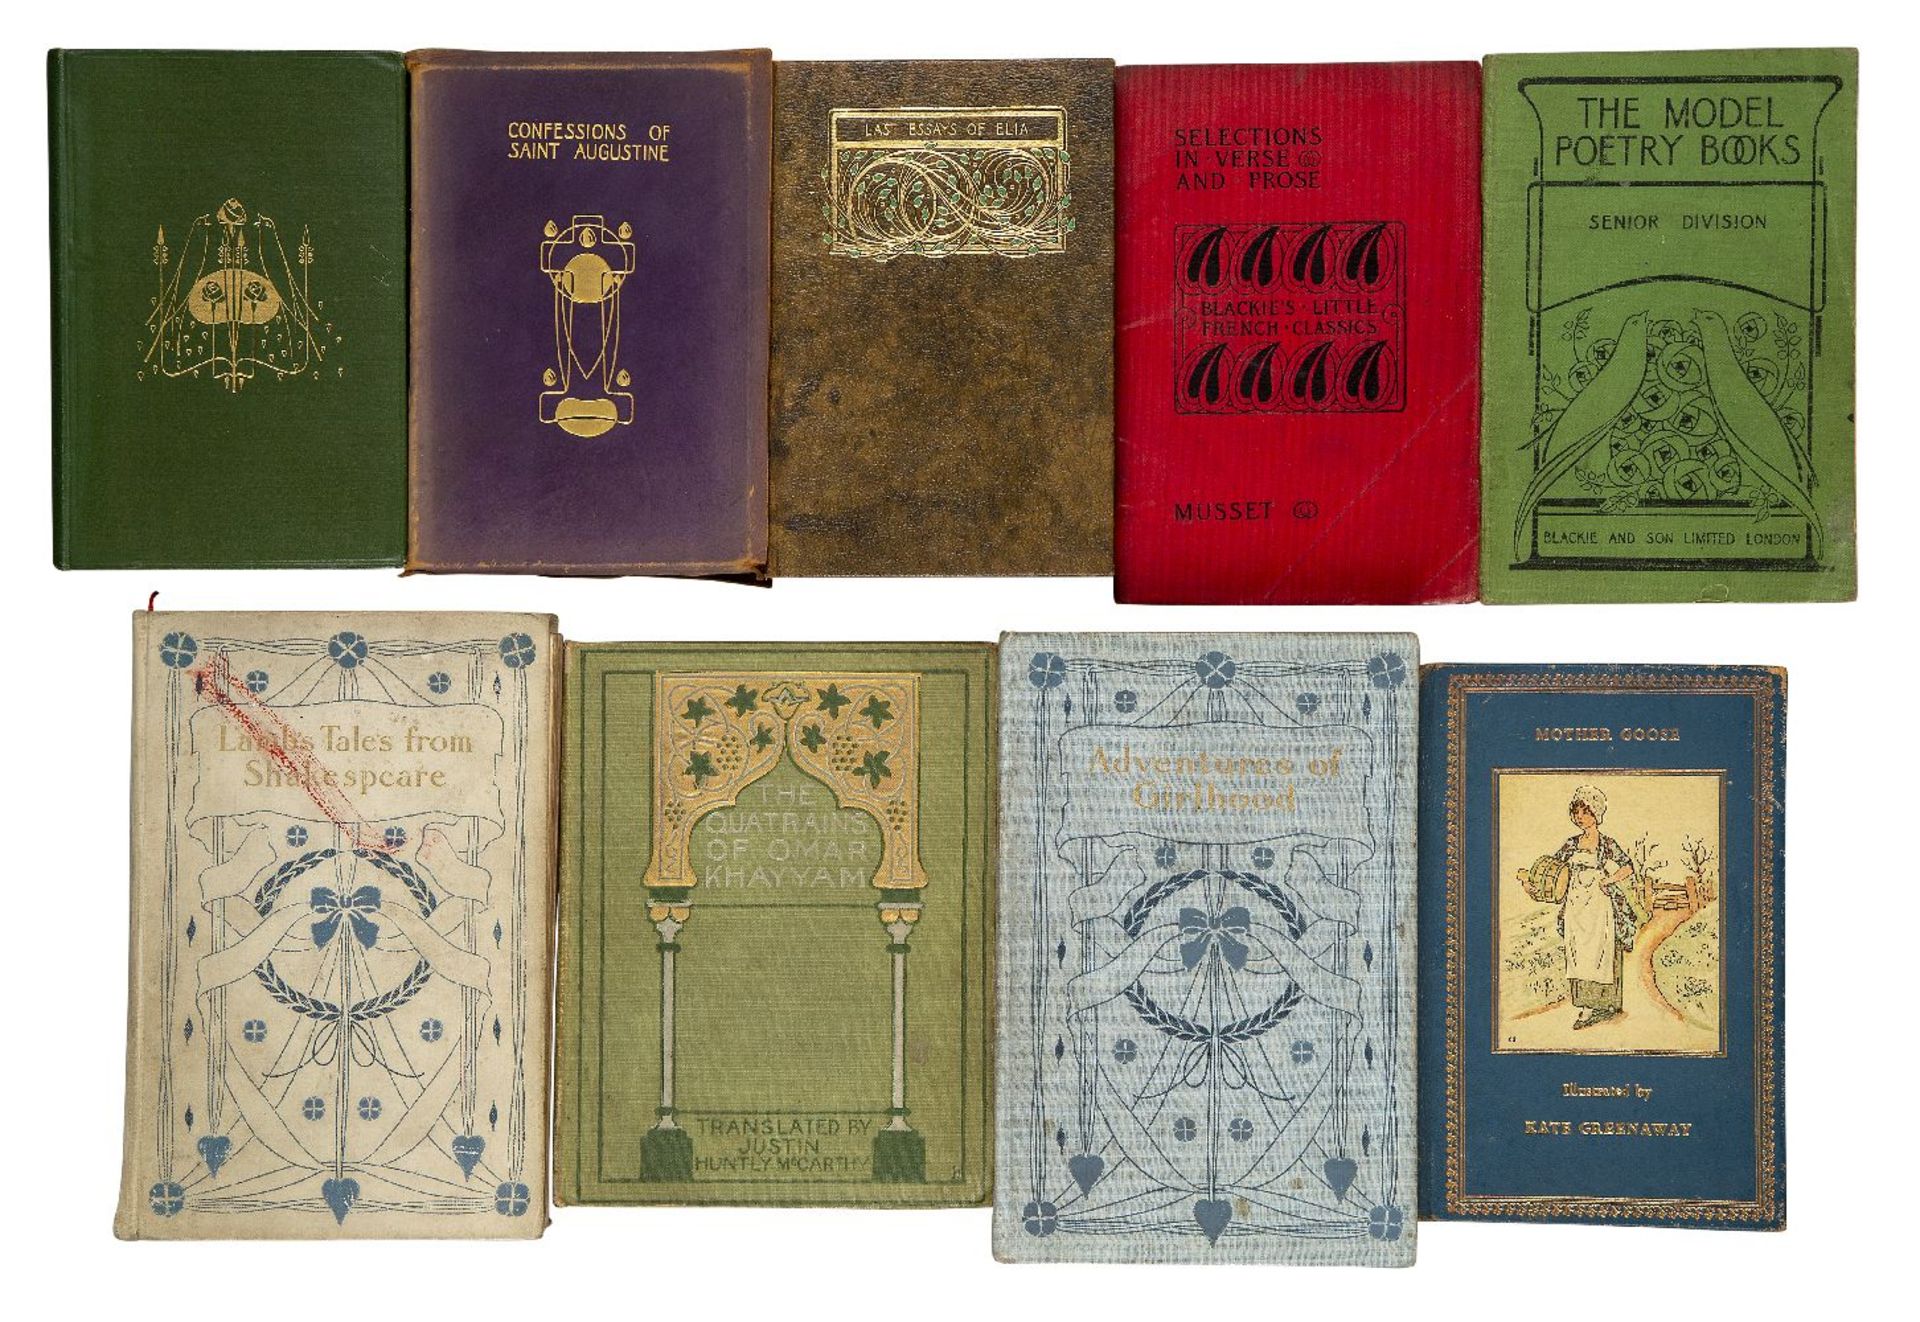 Blackie and Son Ltd, a quantity of books with decorative covers, some in the ‘Glasgow school’ - Image 5 of 8